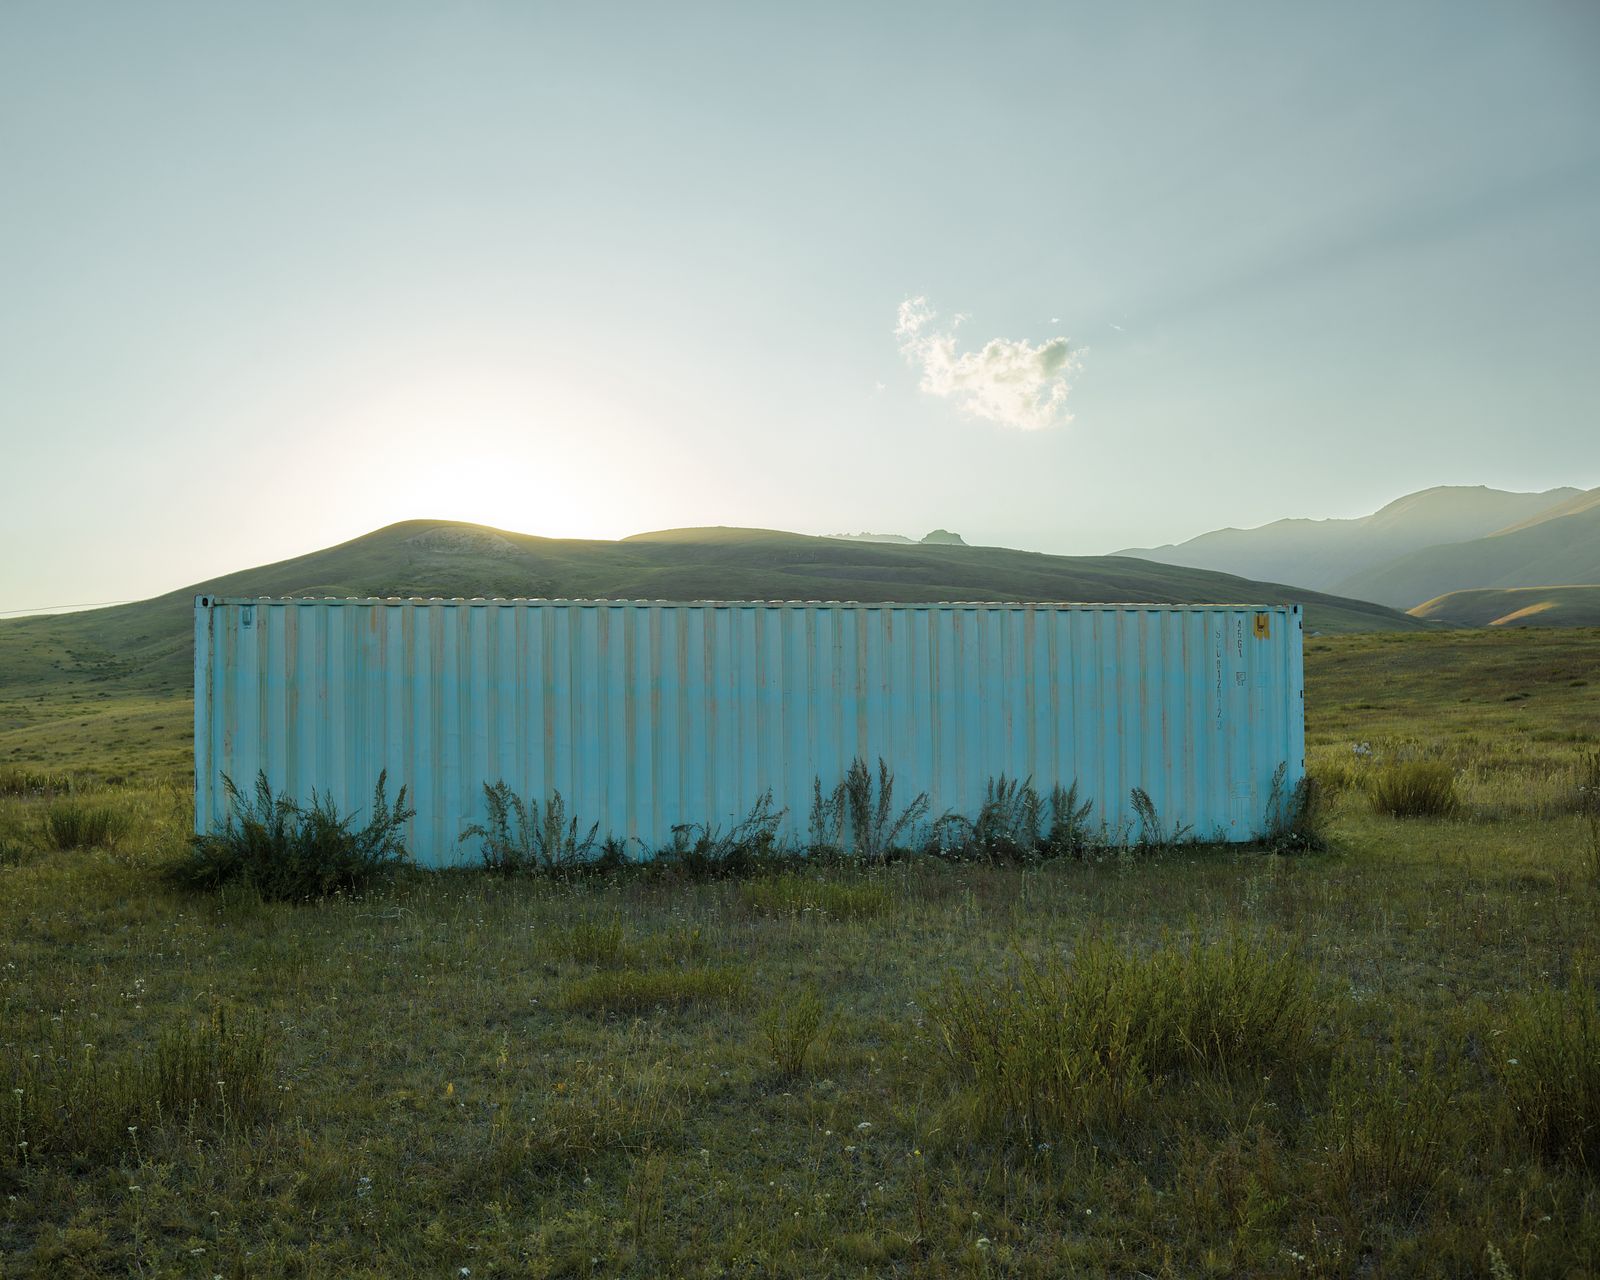 © Louise Amelie - Image from the Missing Member - Kyrgyzstan. A Country On The Move photography project